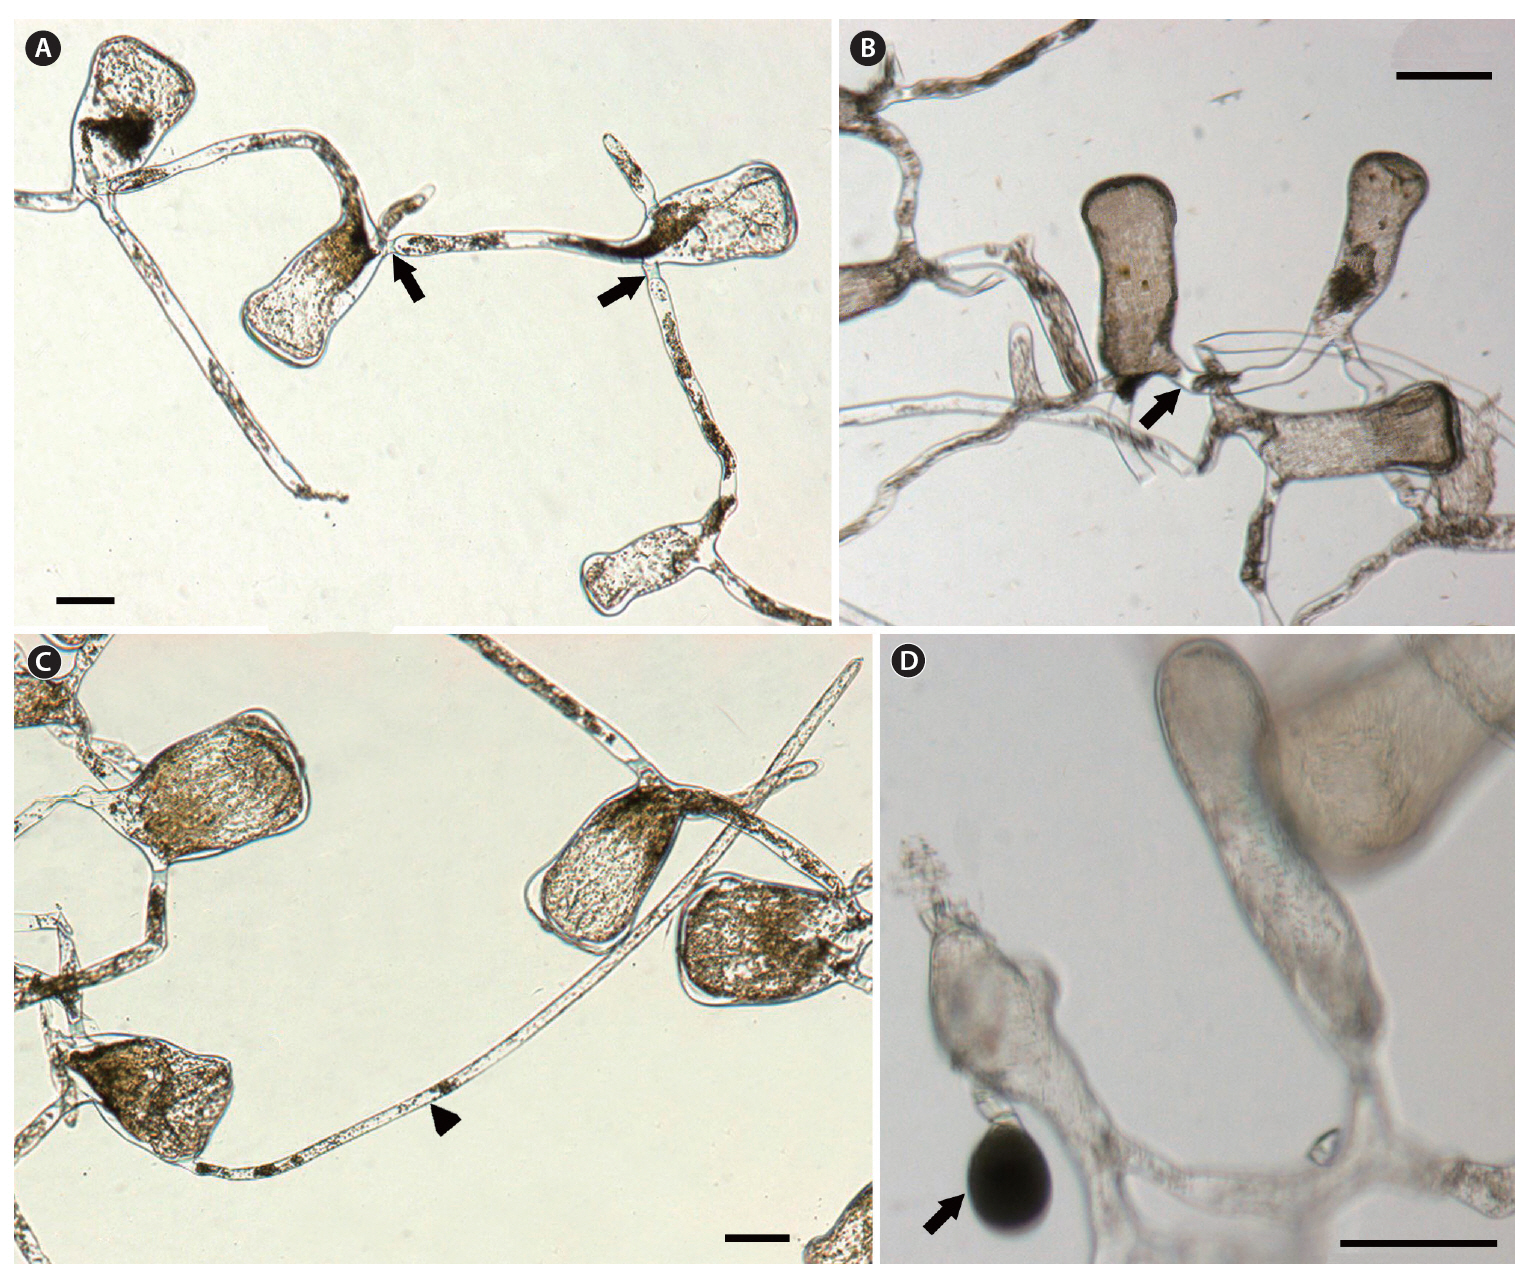 Codium tenuifolium Shimada Tadano and J. Tanaka. (A-C) Utricles having sub-pyriform and clavate shape but rarely with hair (arrowhead) and siphons with an H-shaped septum (arrows) inside relating utricles. (D) Gametangia dangling from a short stalk (arrow). Scale bars represent: A C & D 100 ㎛; B 150 ㎛.